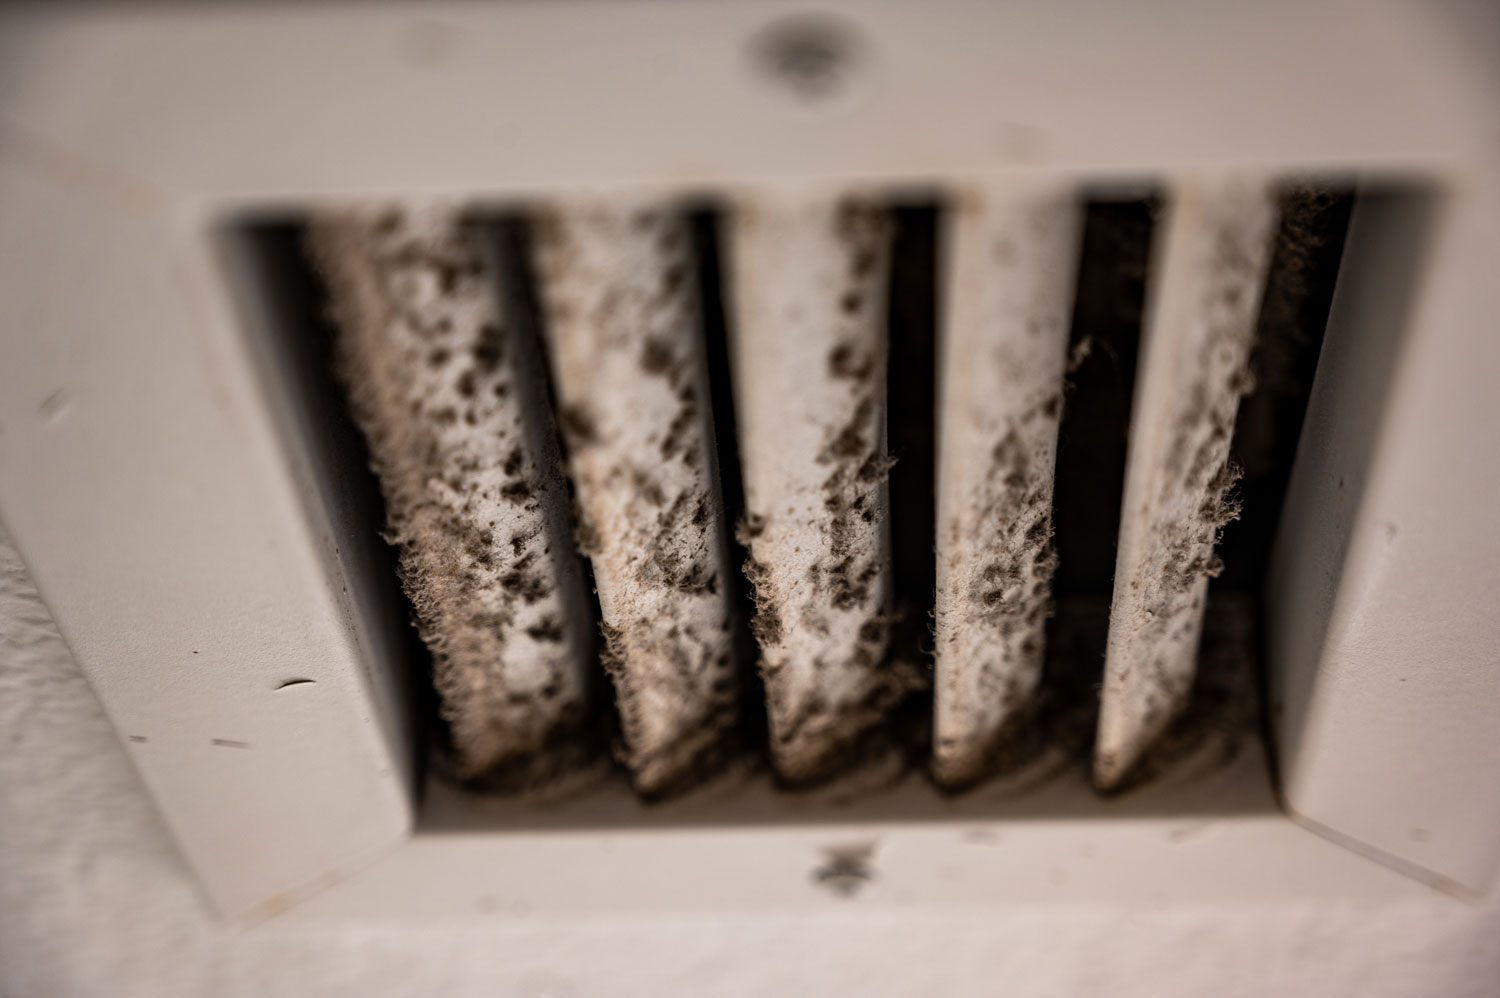 Air vent covered in mould